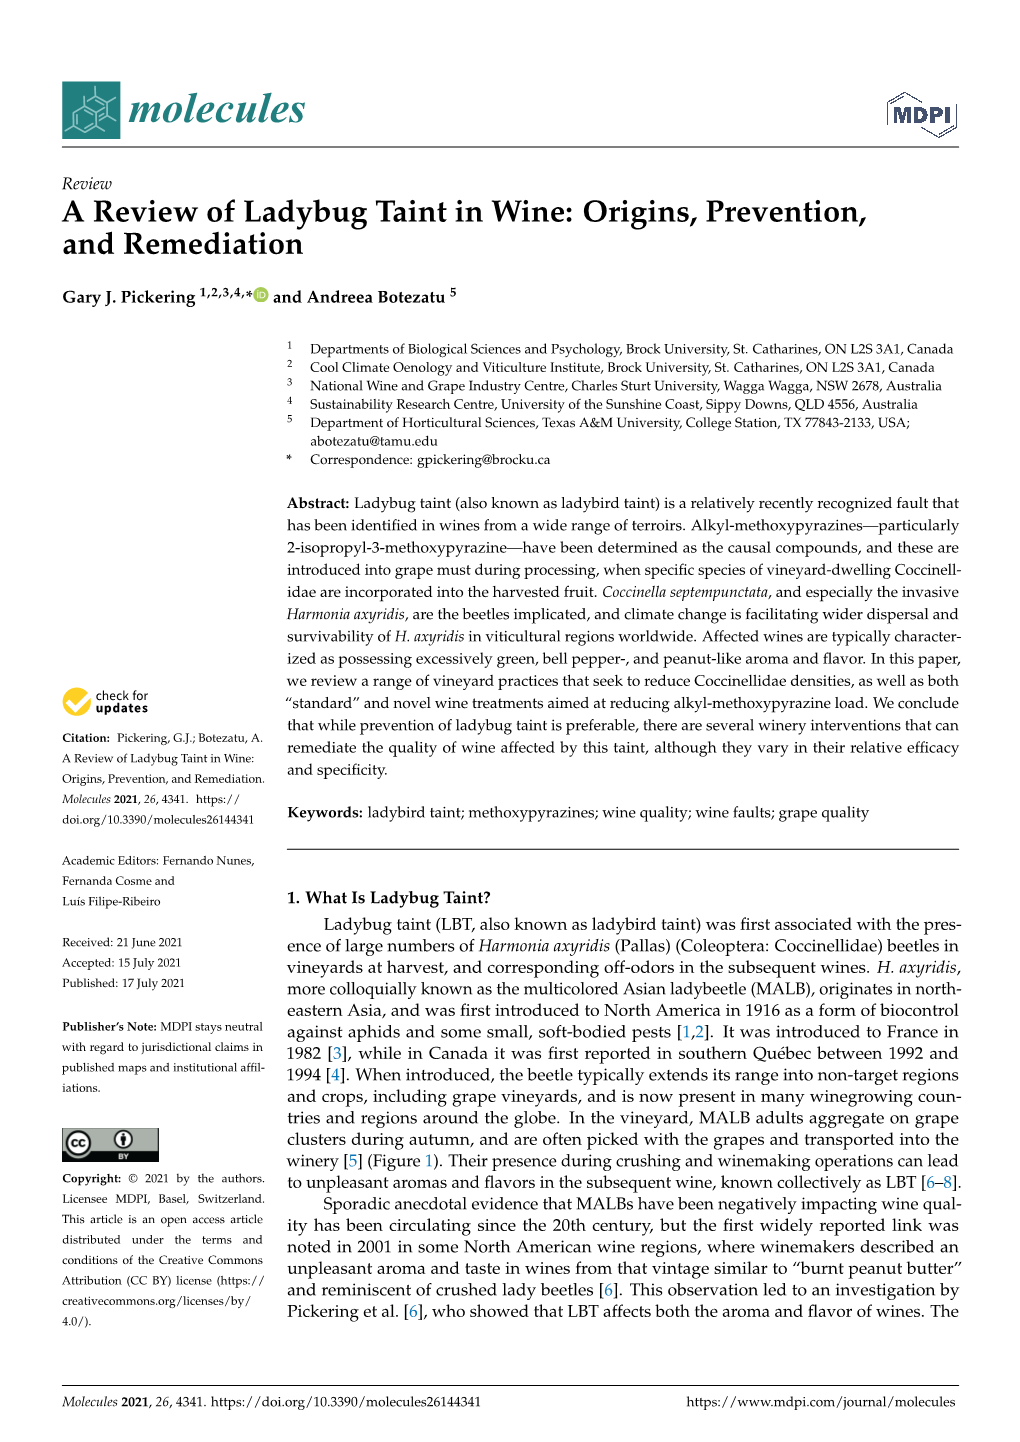 A Review of Ladybug Taint in Wine: Origins, Prevention, and Remediation